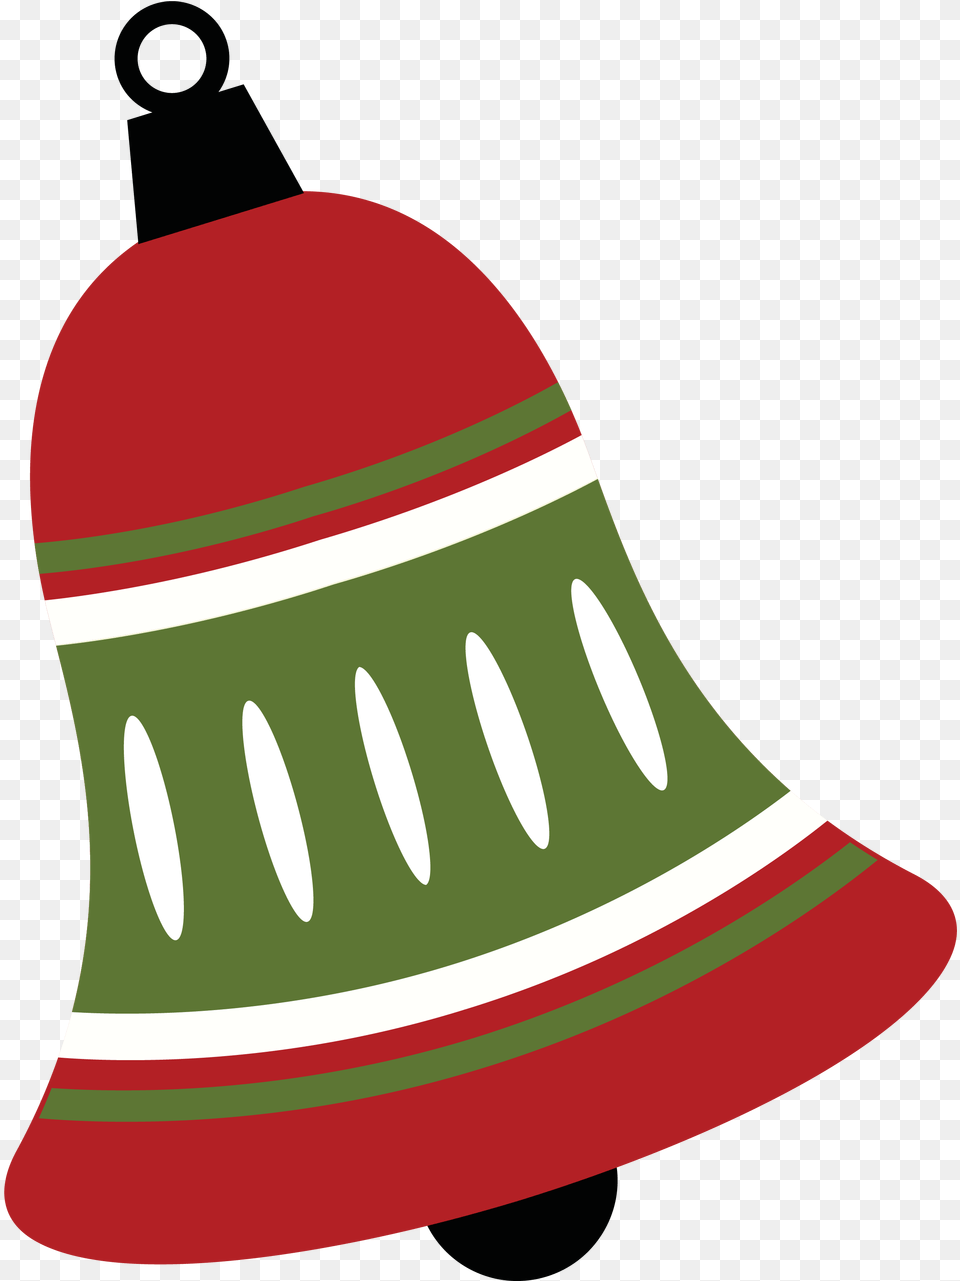 Christmas Bell Svg Cut File Christmas Bell Cut Out, Clothing, Hat, Blade, Knife Png